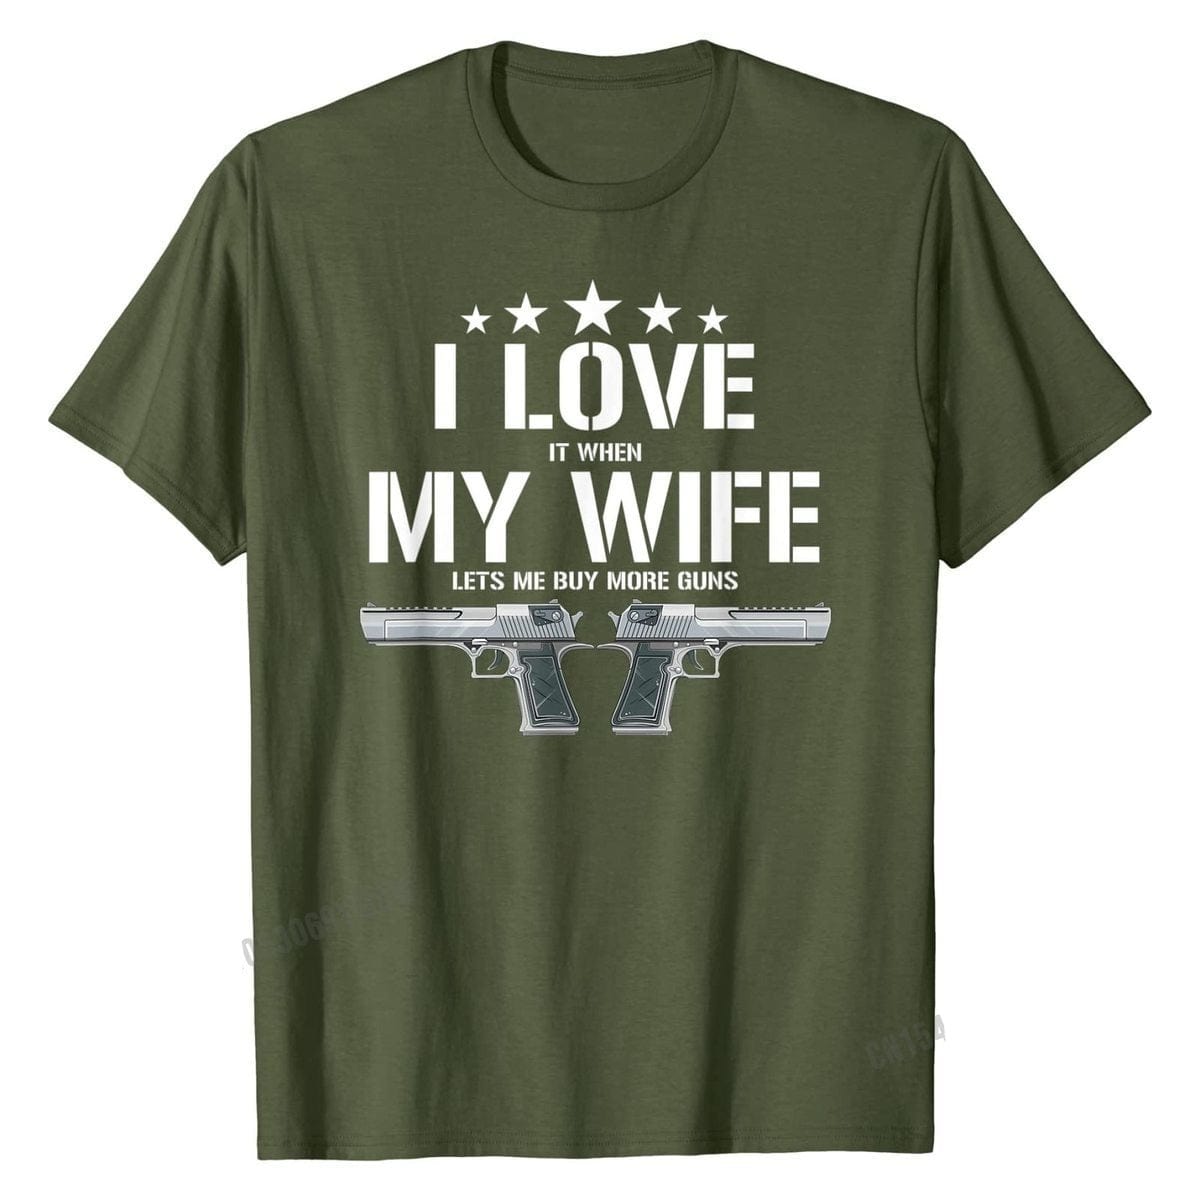 ACTION AIRSOFT 0 Olive / XS T-shirt "I love my wife"